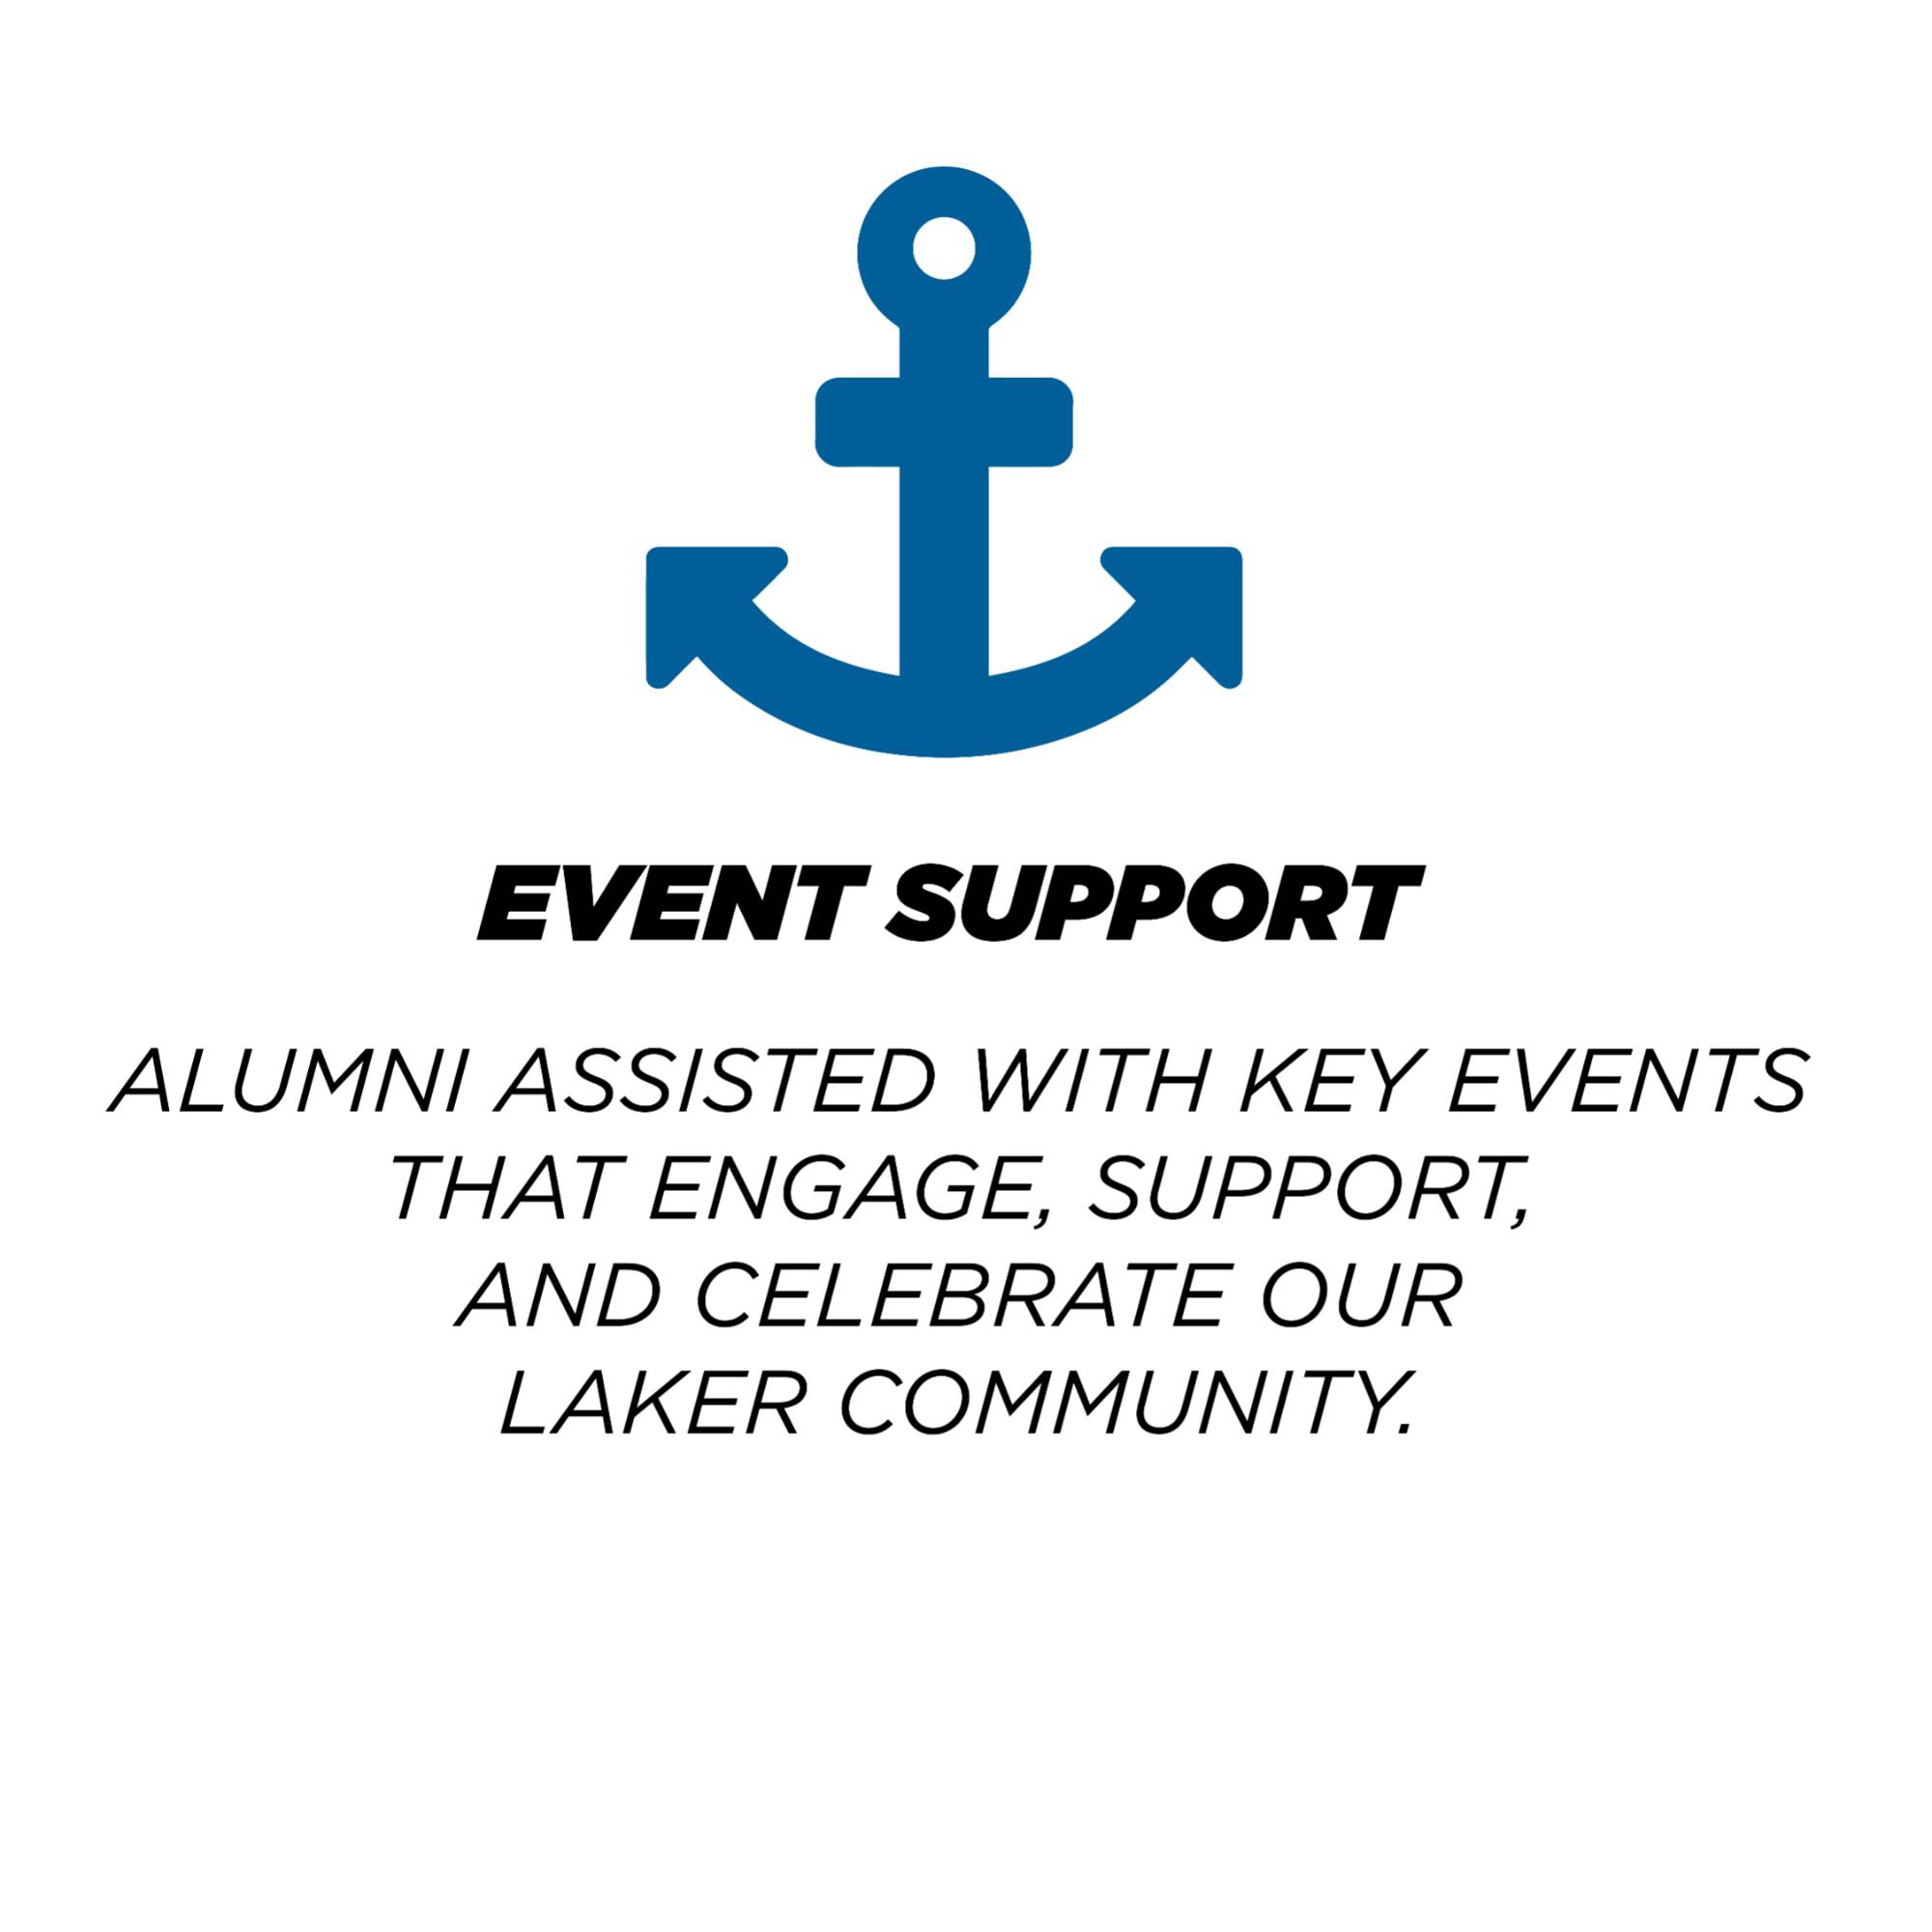 Alumni Assisted with key events that engage, support, and celebrate our Laker community.